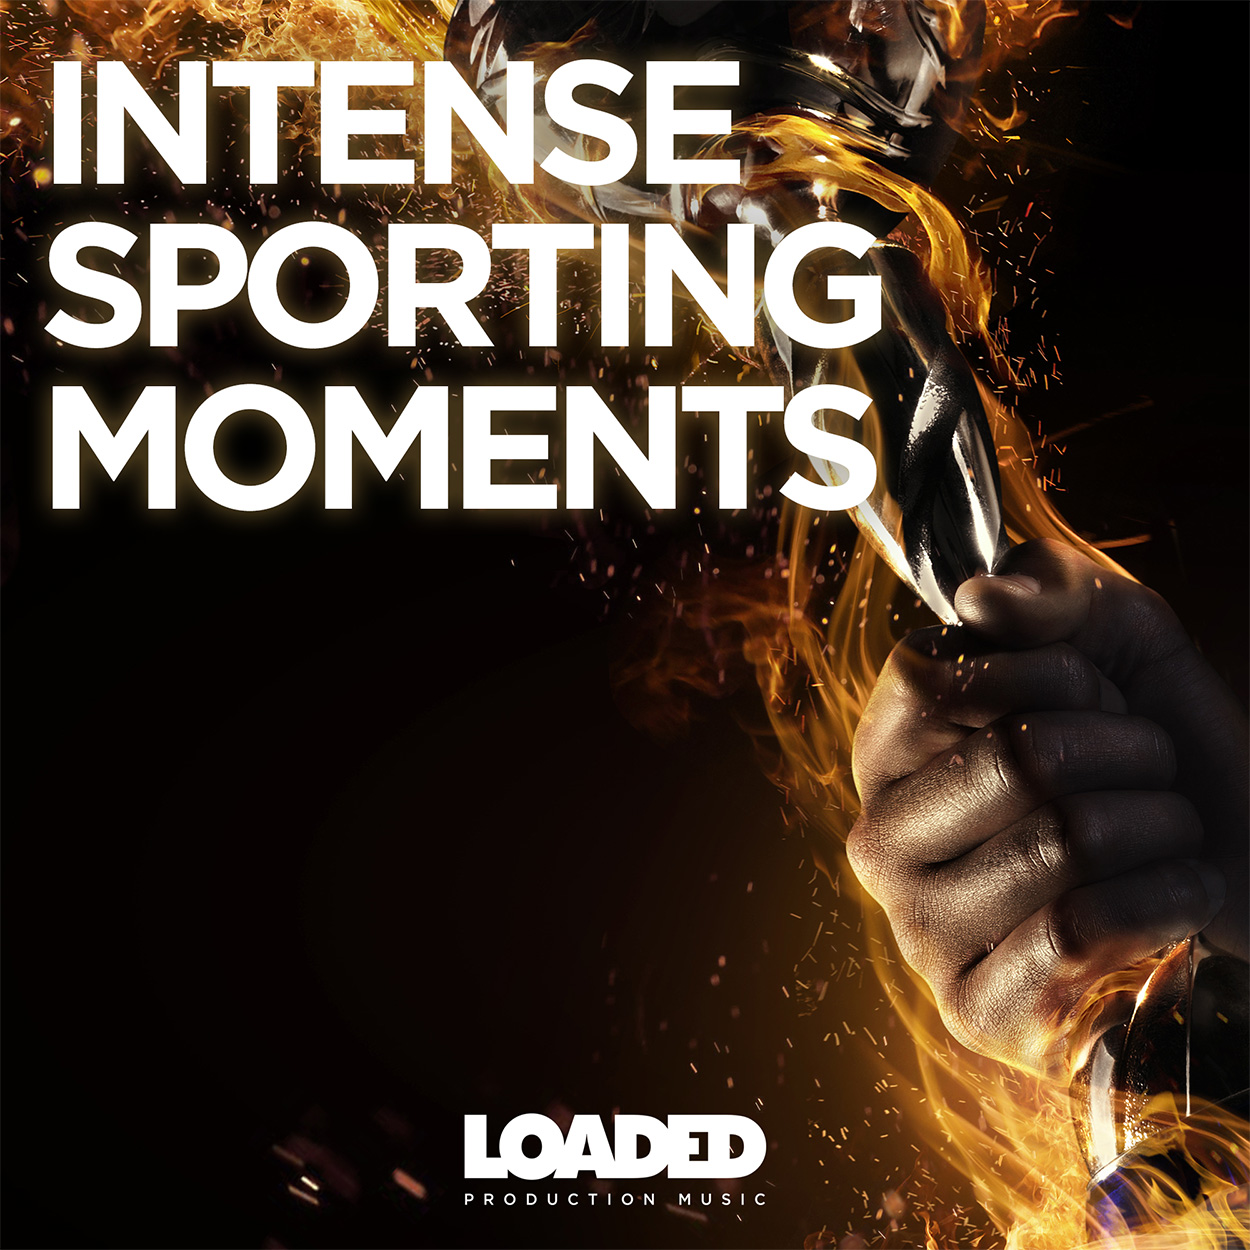 LPM181 - Intense Sporting Moments Album Cover